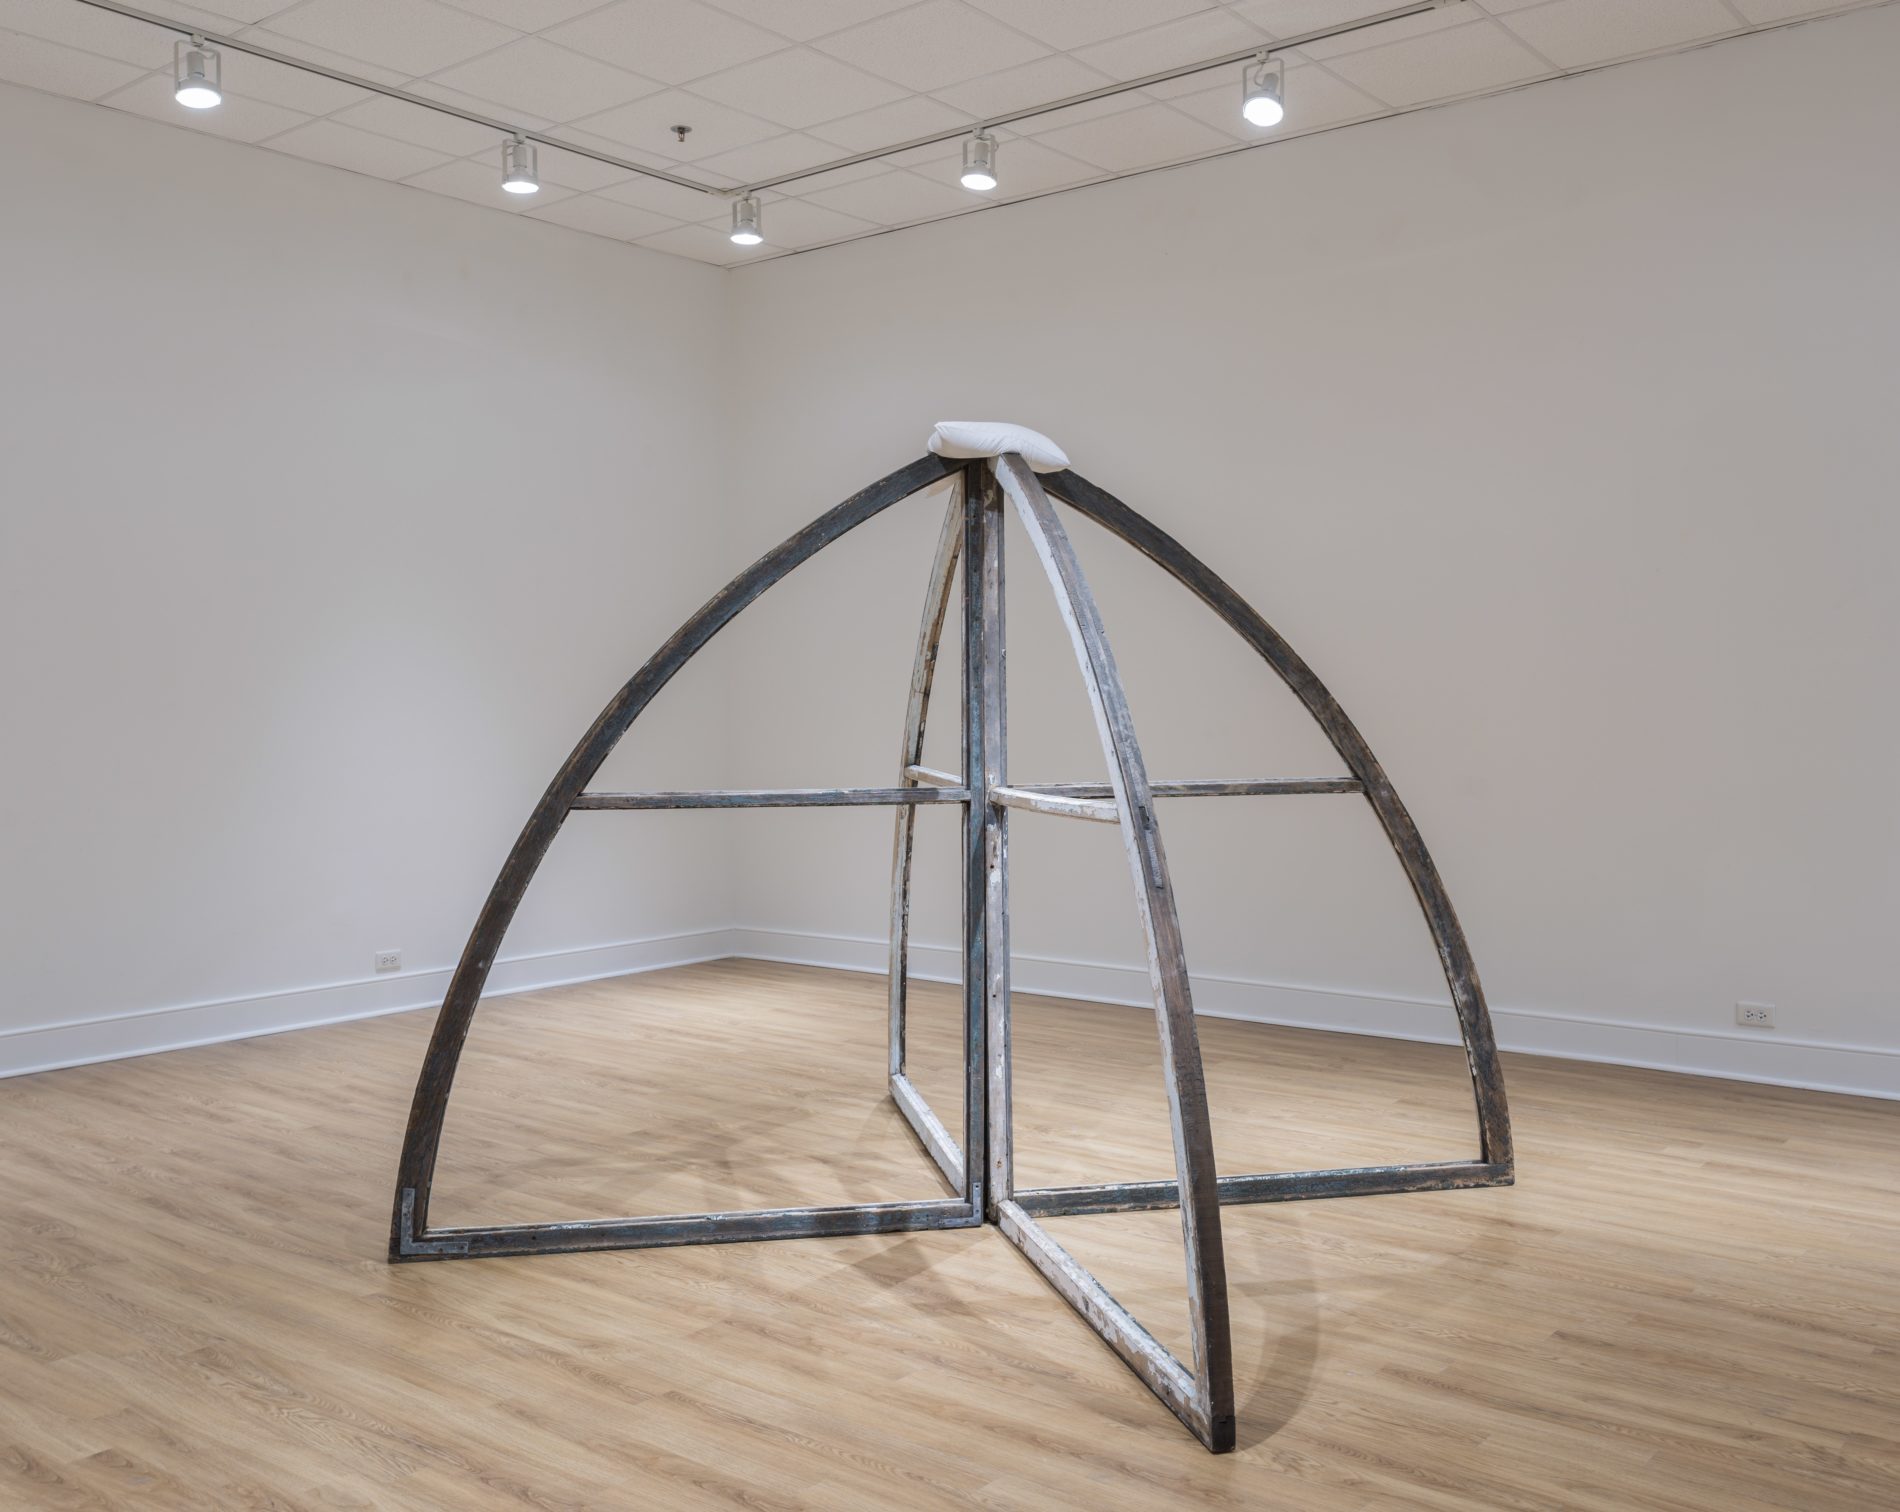 Four-finned dome-like sculpture by Virginia Overton stands in the corner of a gallery with white floors and ceiling and light-colored wood flooring.